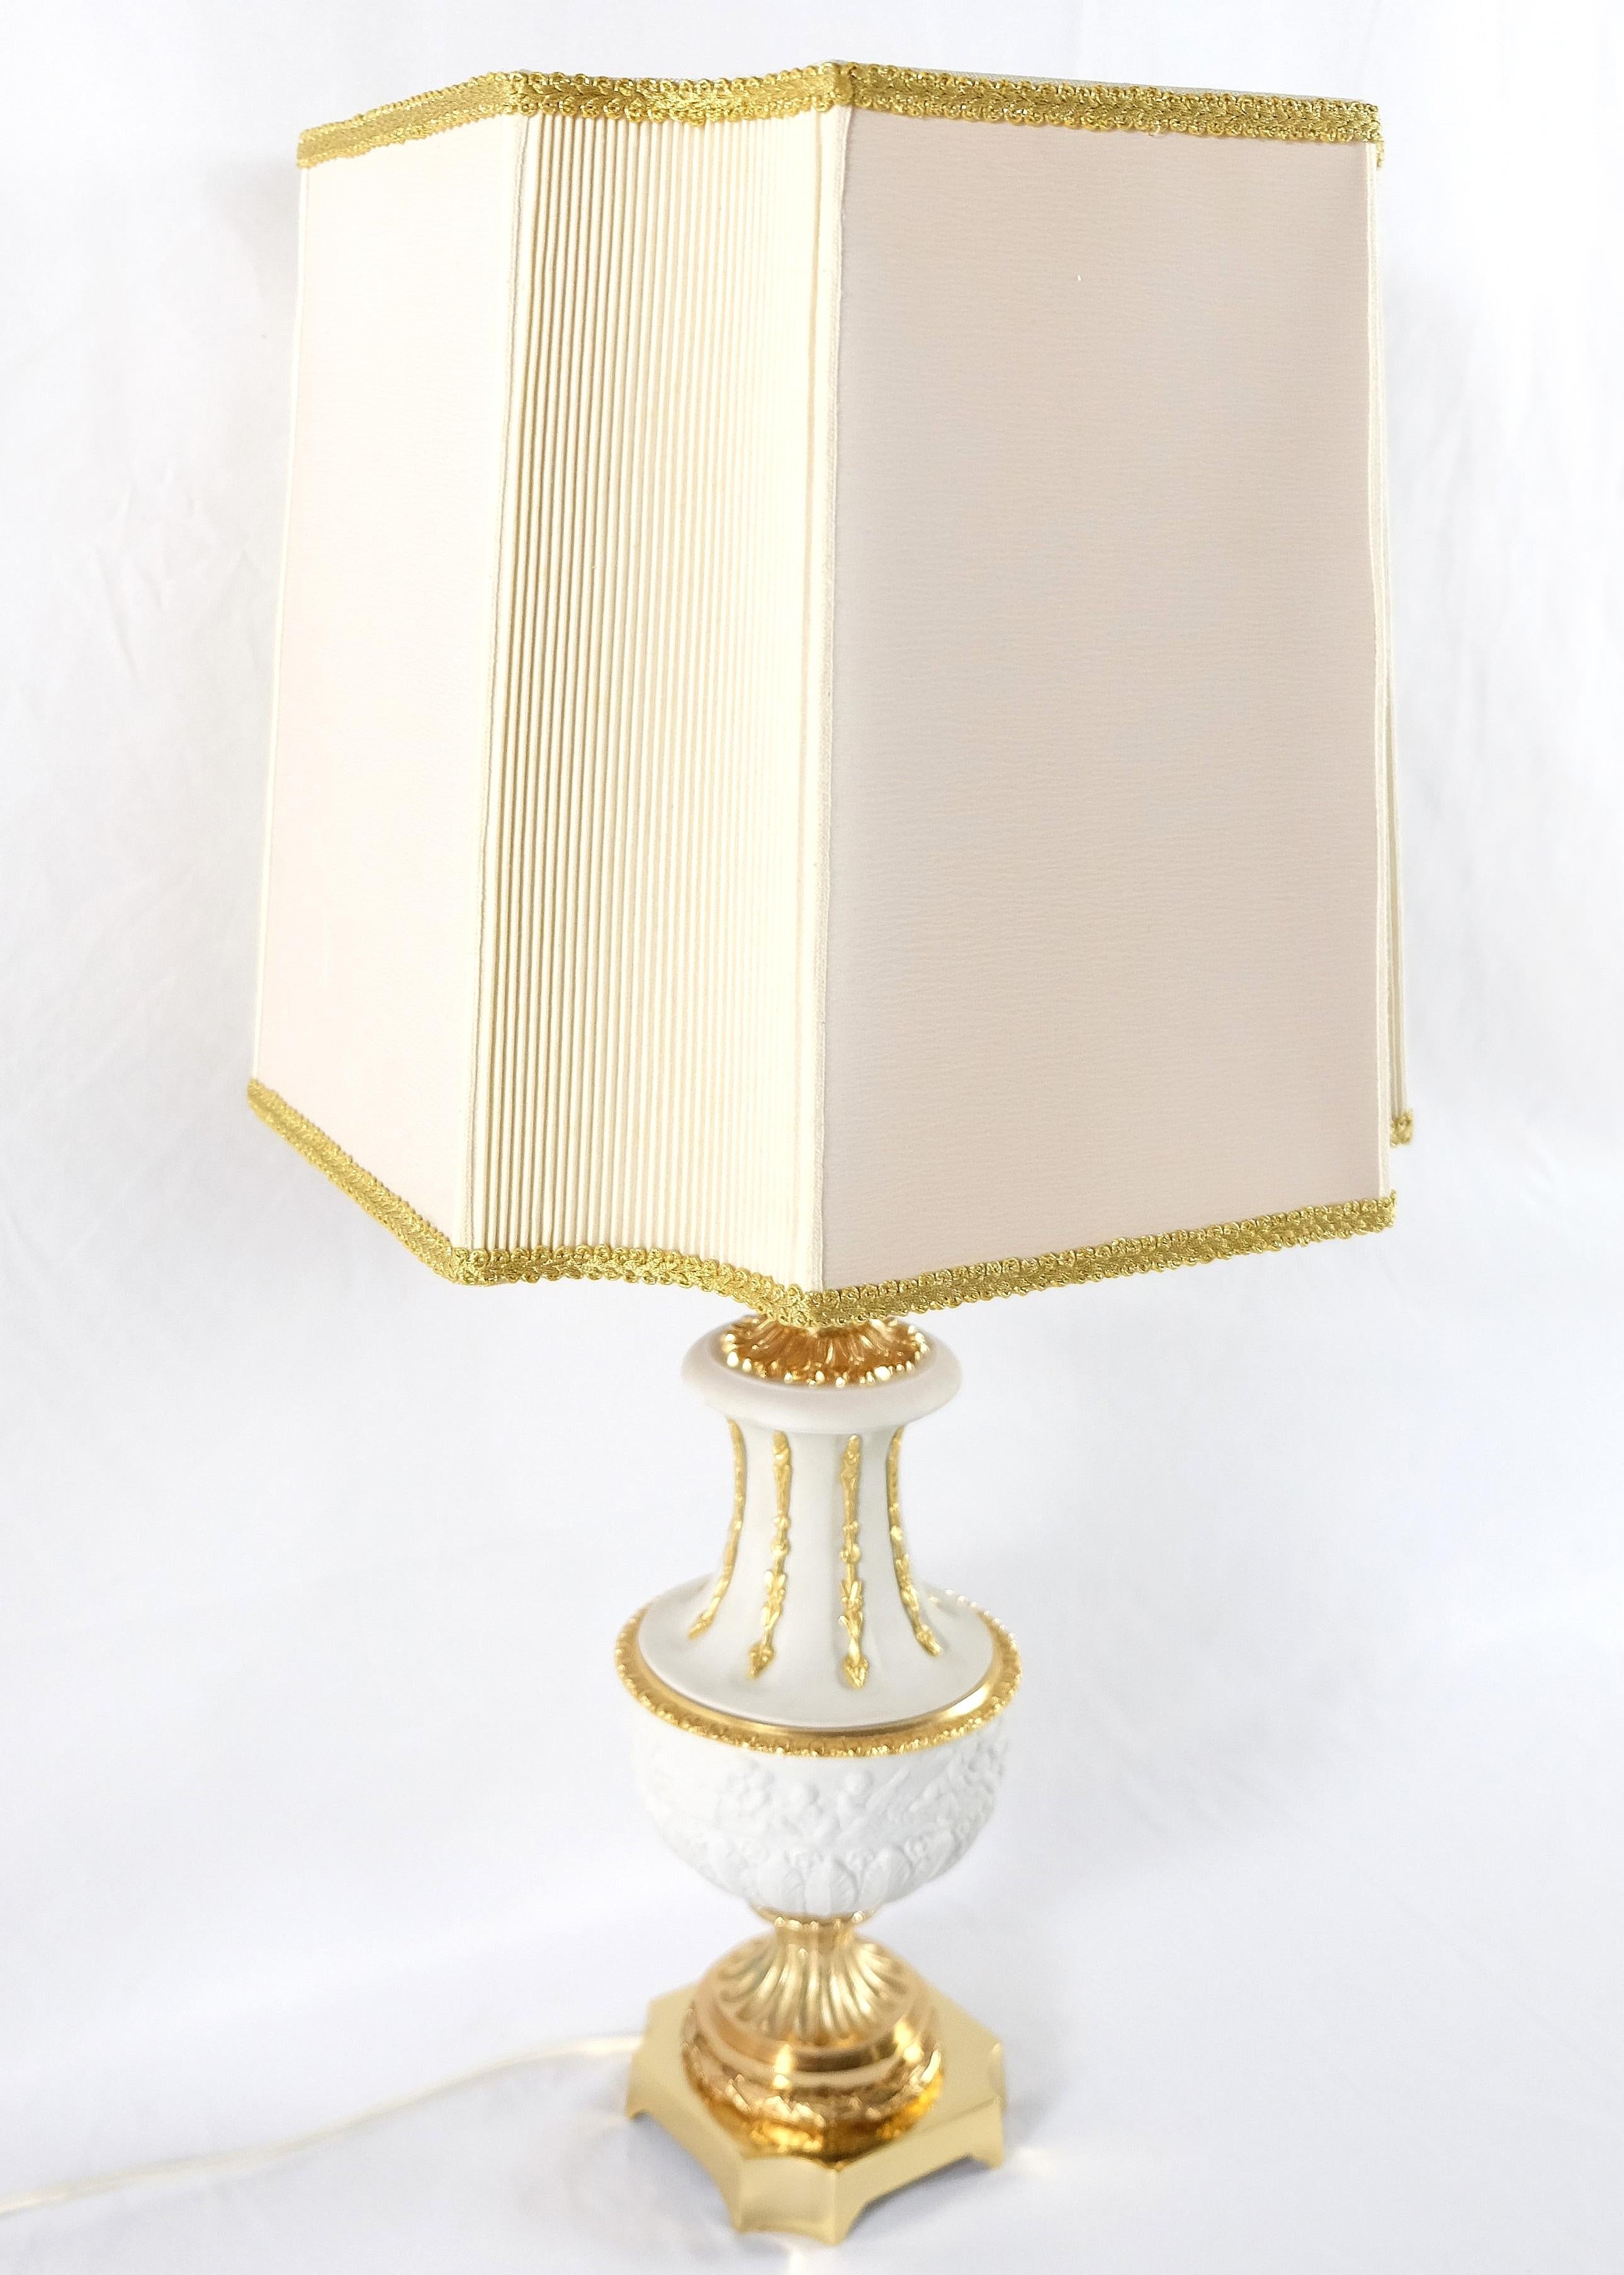 Mangani, Italy Classically Designed Porcelain Table Lamp For Sale 4